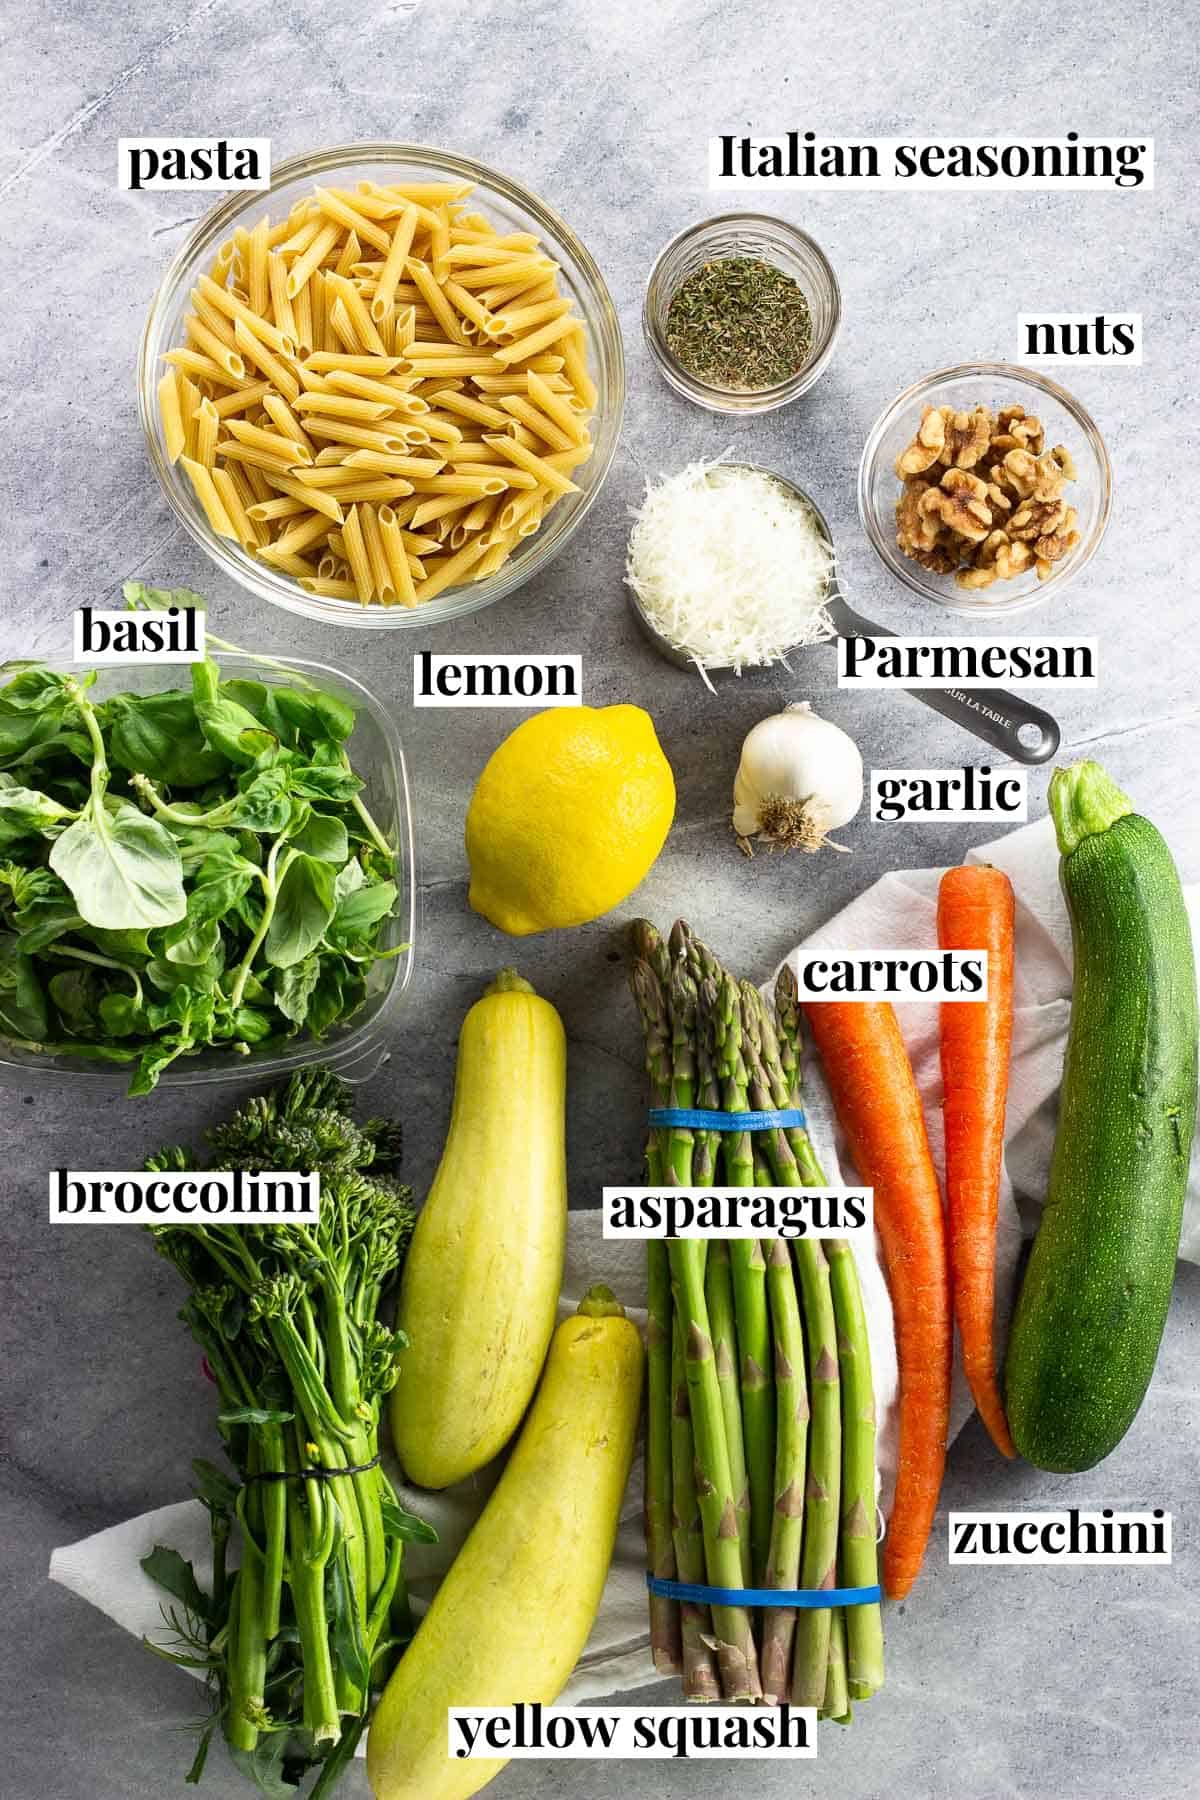 The recipe ingredients laid out on a board labeled with their text names.